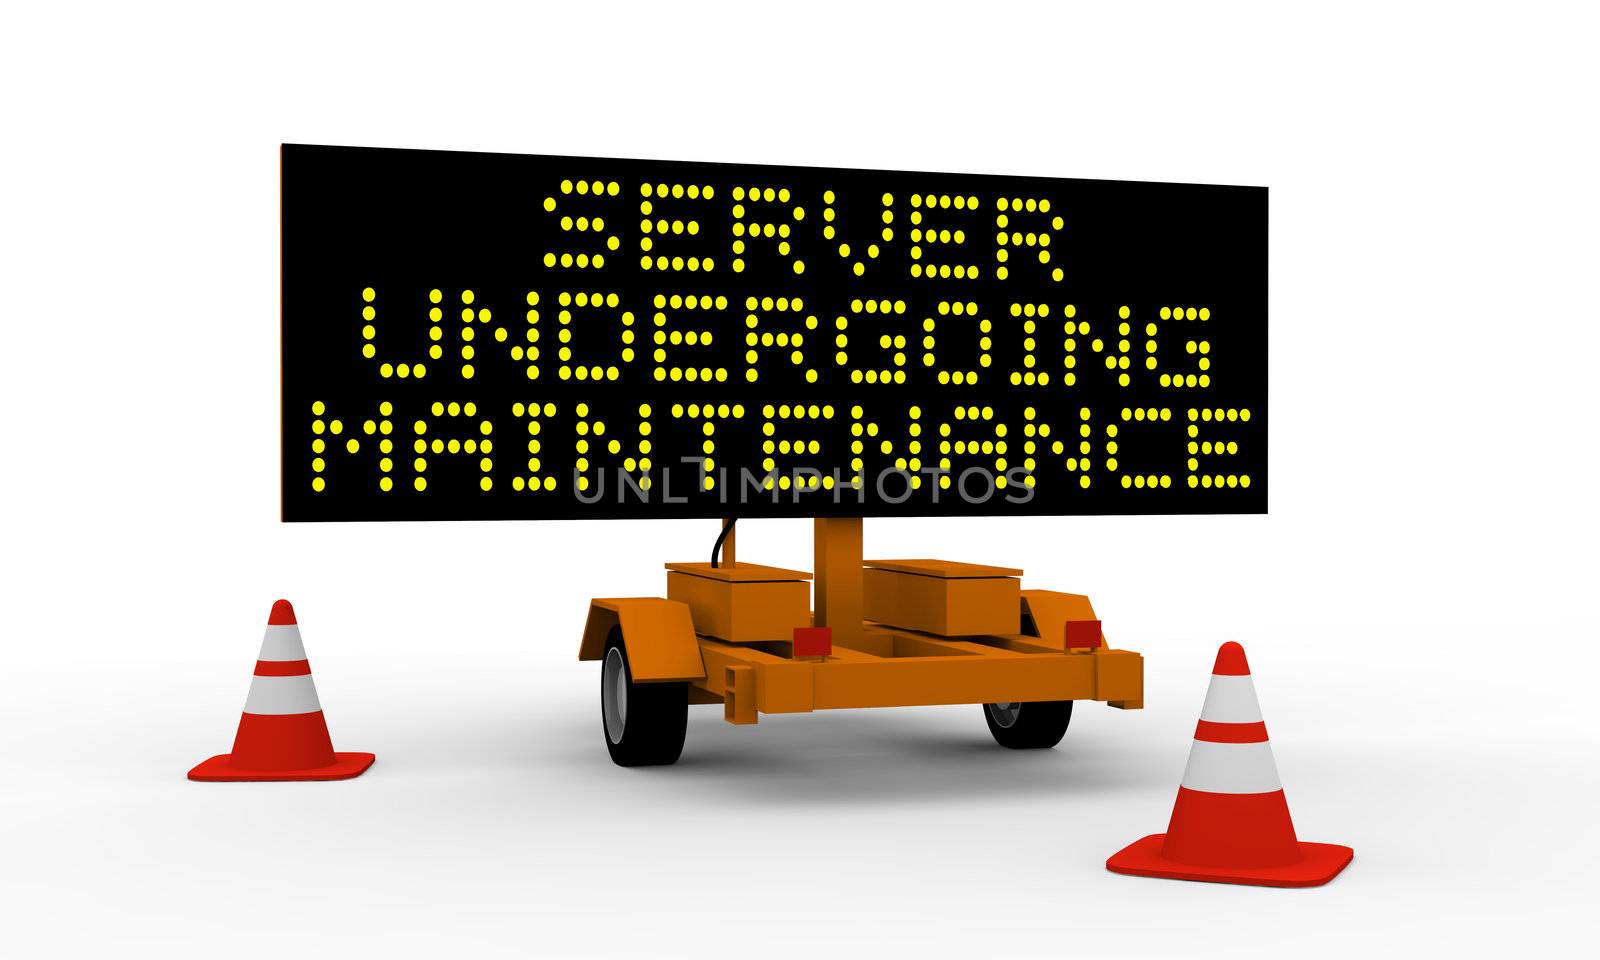 Black signboard on the top of a roadworks cart saying Undergoing maintenance